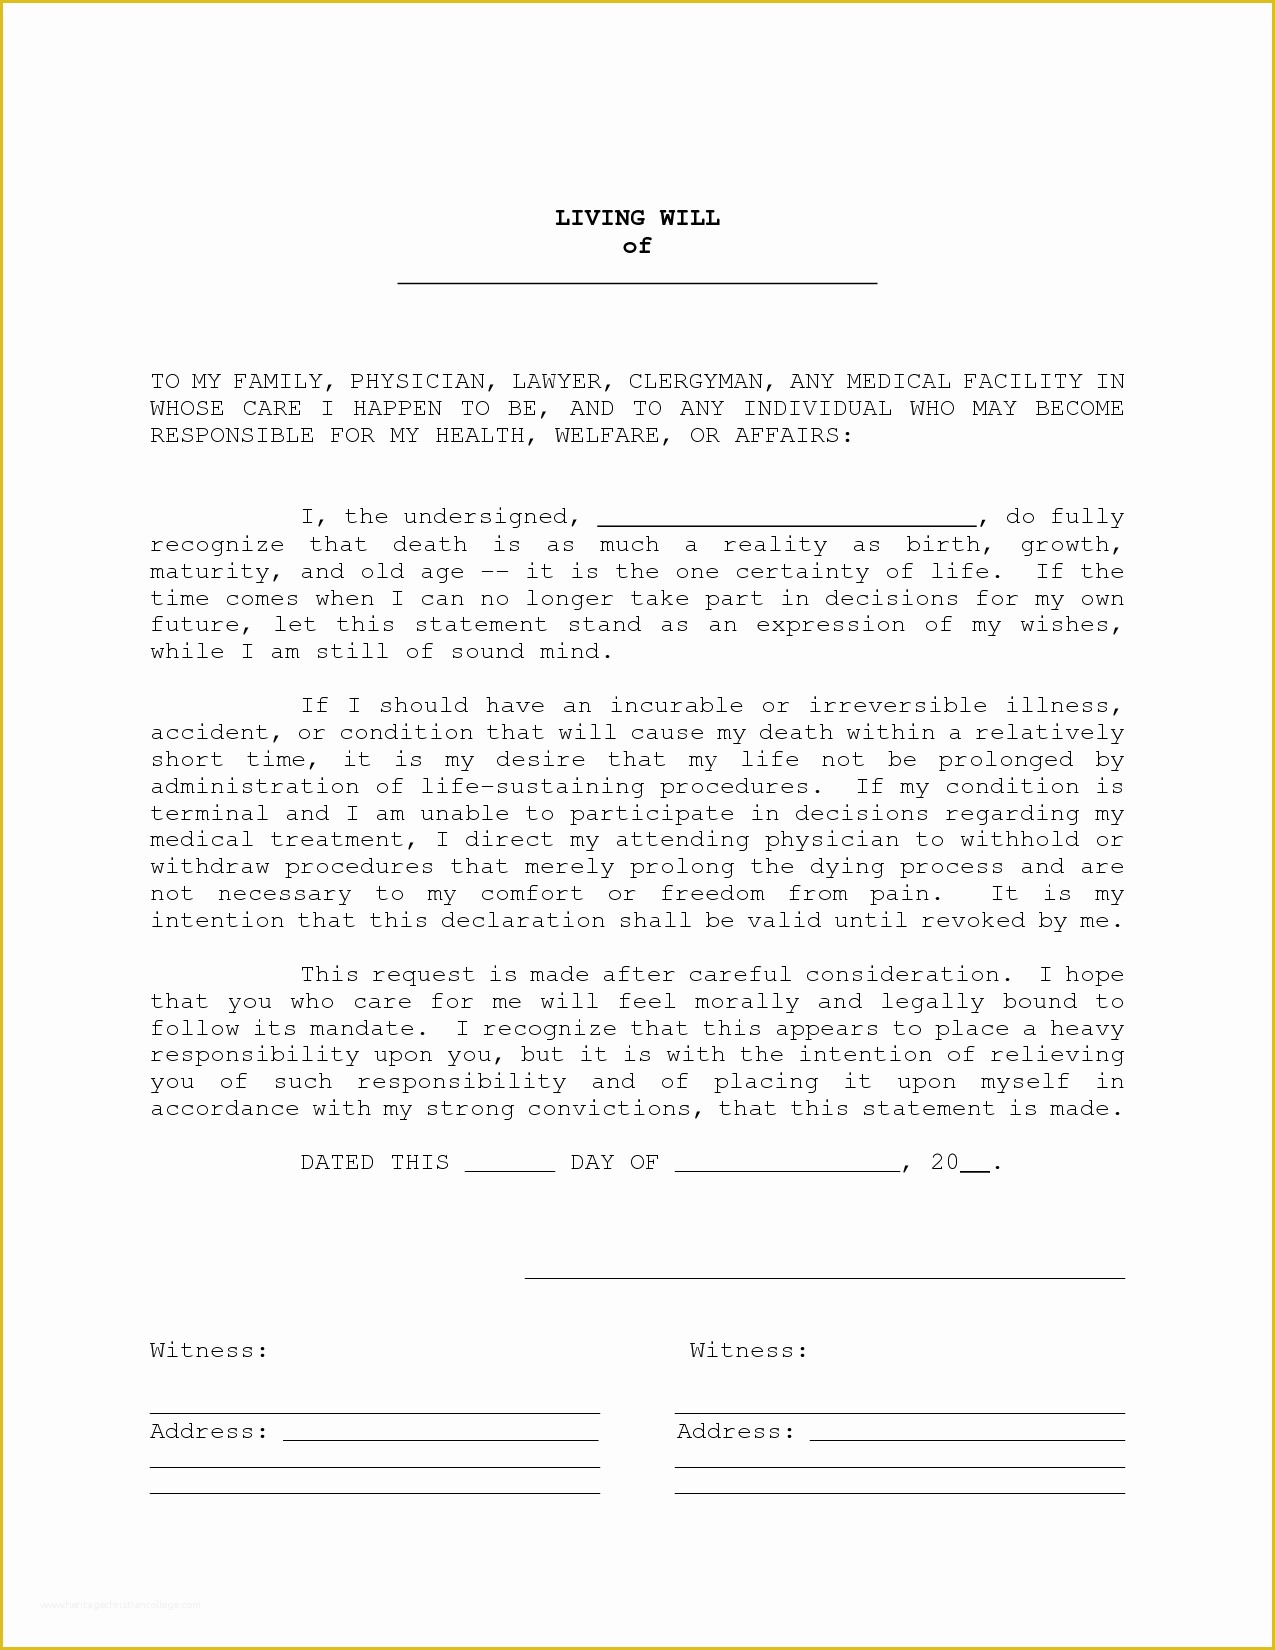 Free Online Will Template Of Living Will Sample Free Printable Documents